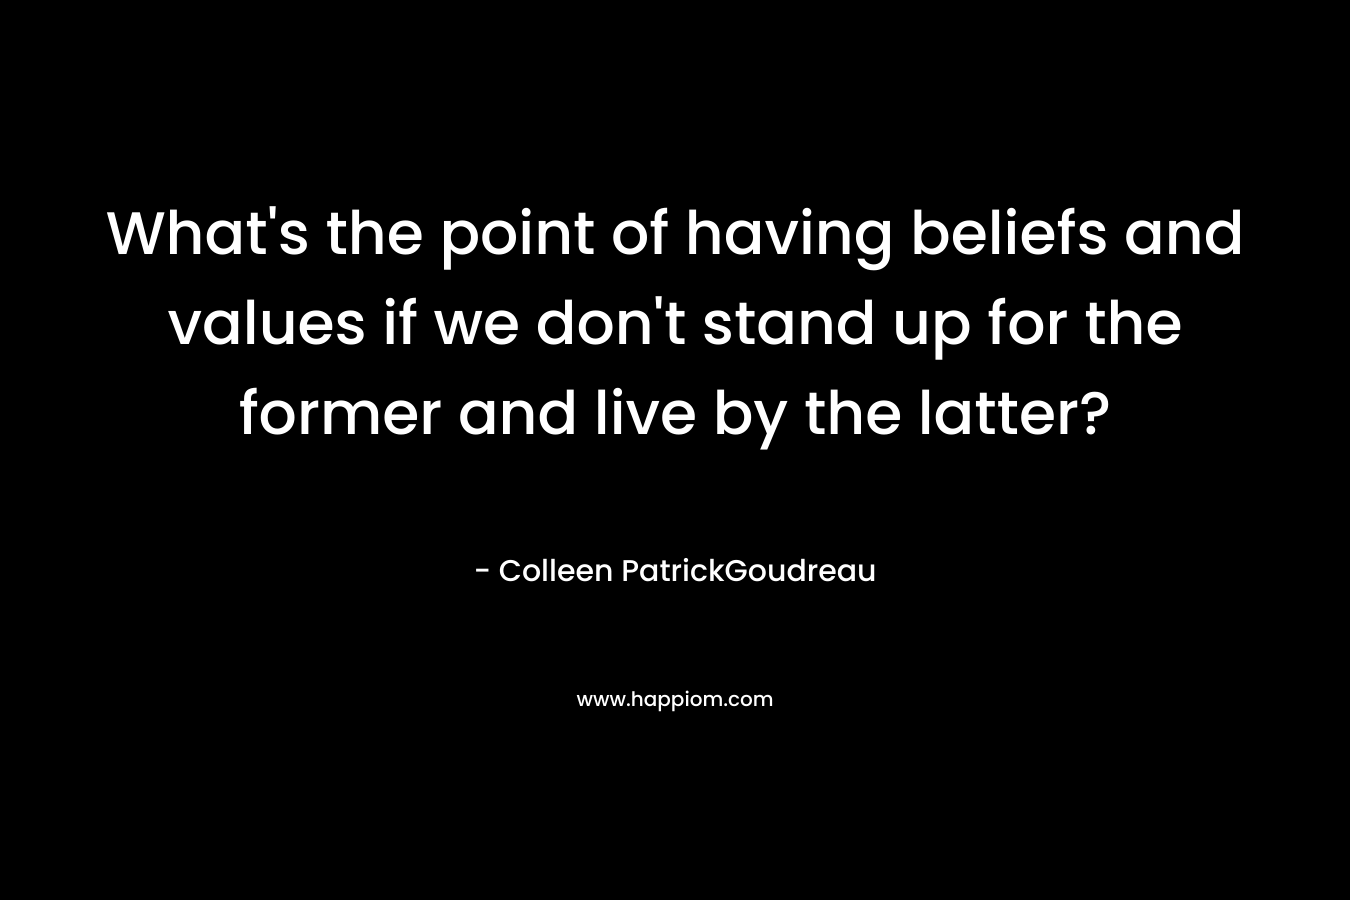 What’s the point of having beliefs and values if we don’t stand up for the former and live by the latter? – Colleen PatrickGoudreau